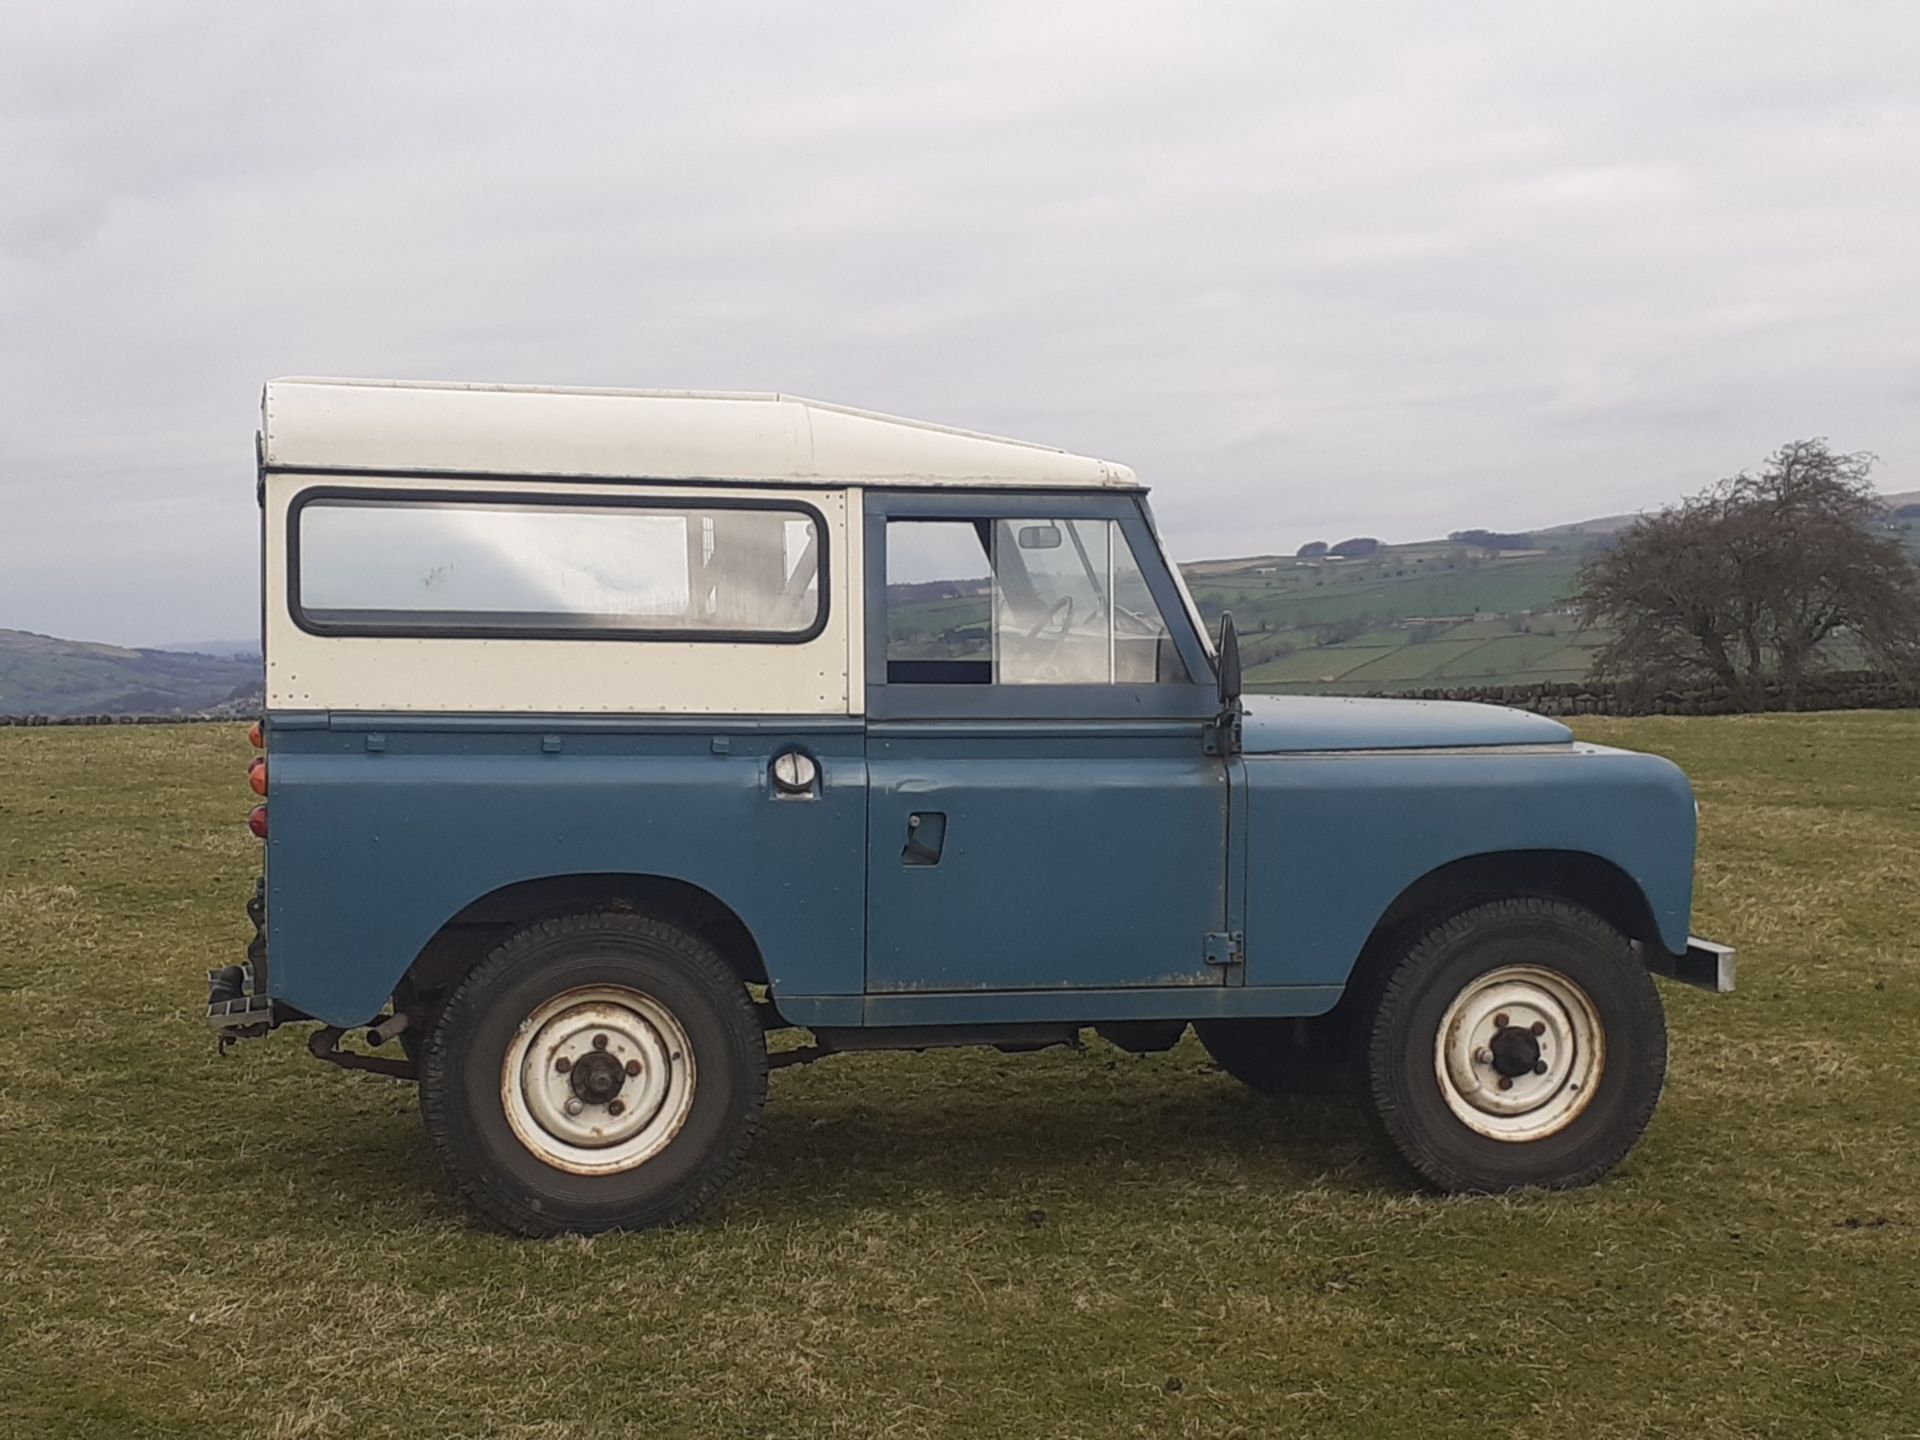 1972 LAND ROVER 88" - 4 CYL 2.5 DIESEL NATURALLY ASPIRATED, DRIVES AS IT SHOULD, WONDERFUL PATINA - Image 10 of 15